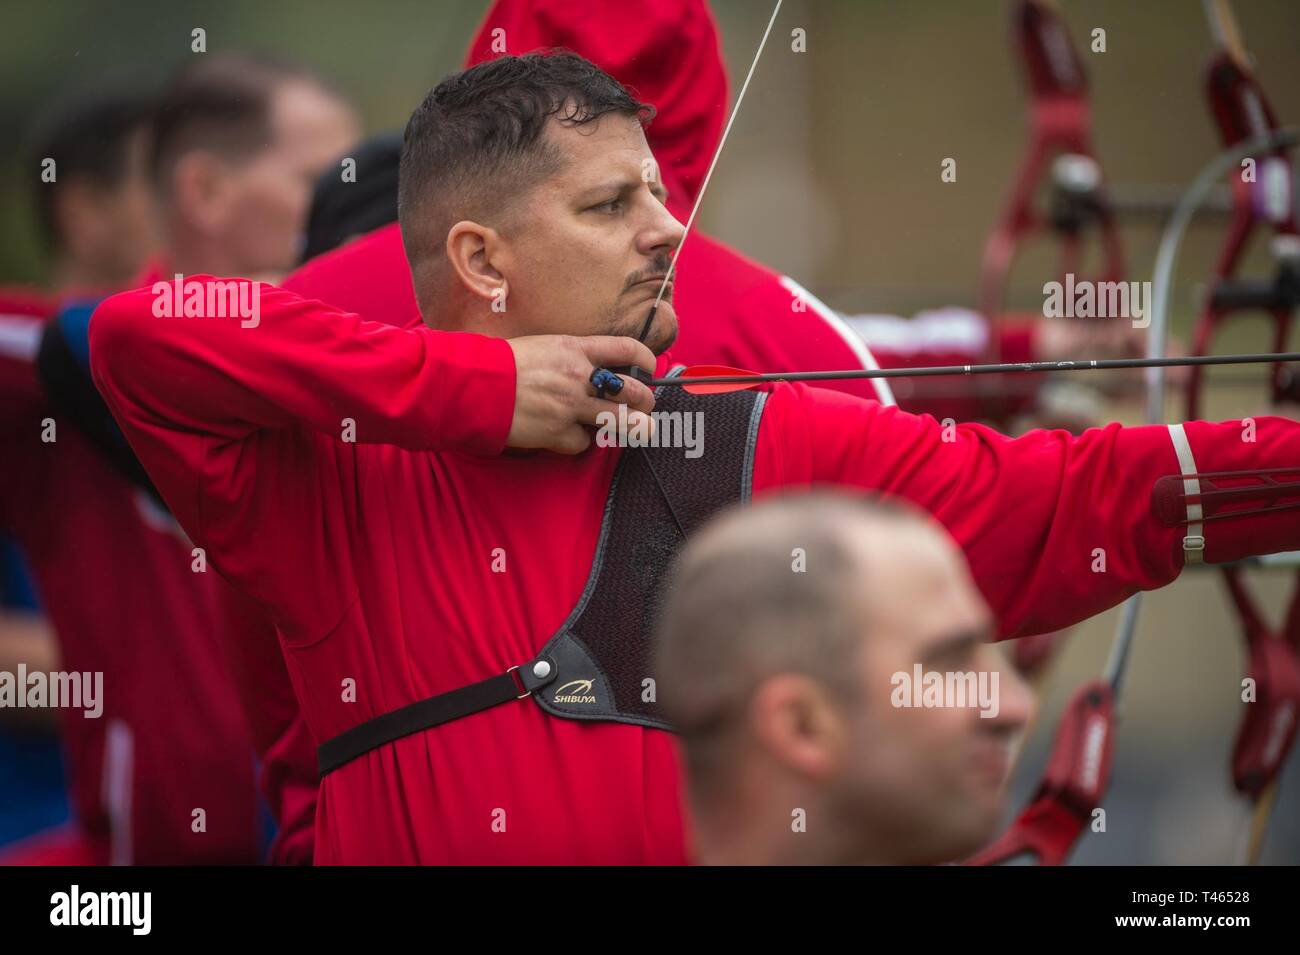 A U.S. Marine Corps athlete participates in the 2019 Marine Corps Trials archery competition at Marine Corps Base Camp Pendleton, California, March 2. The Marine Corps Trials promotes recovery and rehabilitation through adaptive sports participation and develops camaraderie among recovering service members and veterans. Additionally, the competition is an opportunity for participants to demonstrate physical and mental achievements and serves as the primary venue to select Marine Corps participants for the DoD Warrior Games. Stock Photo